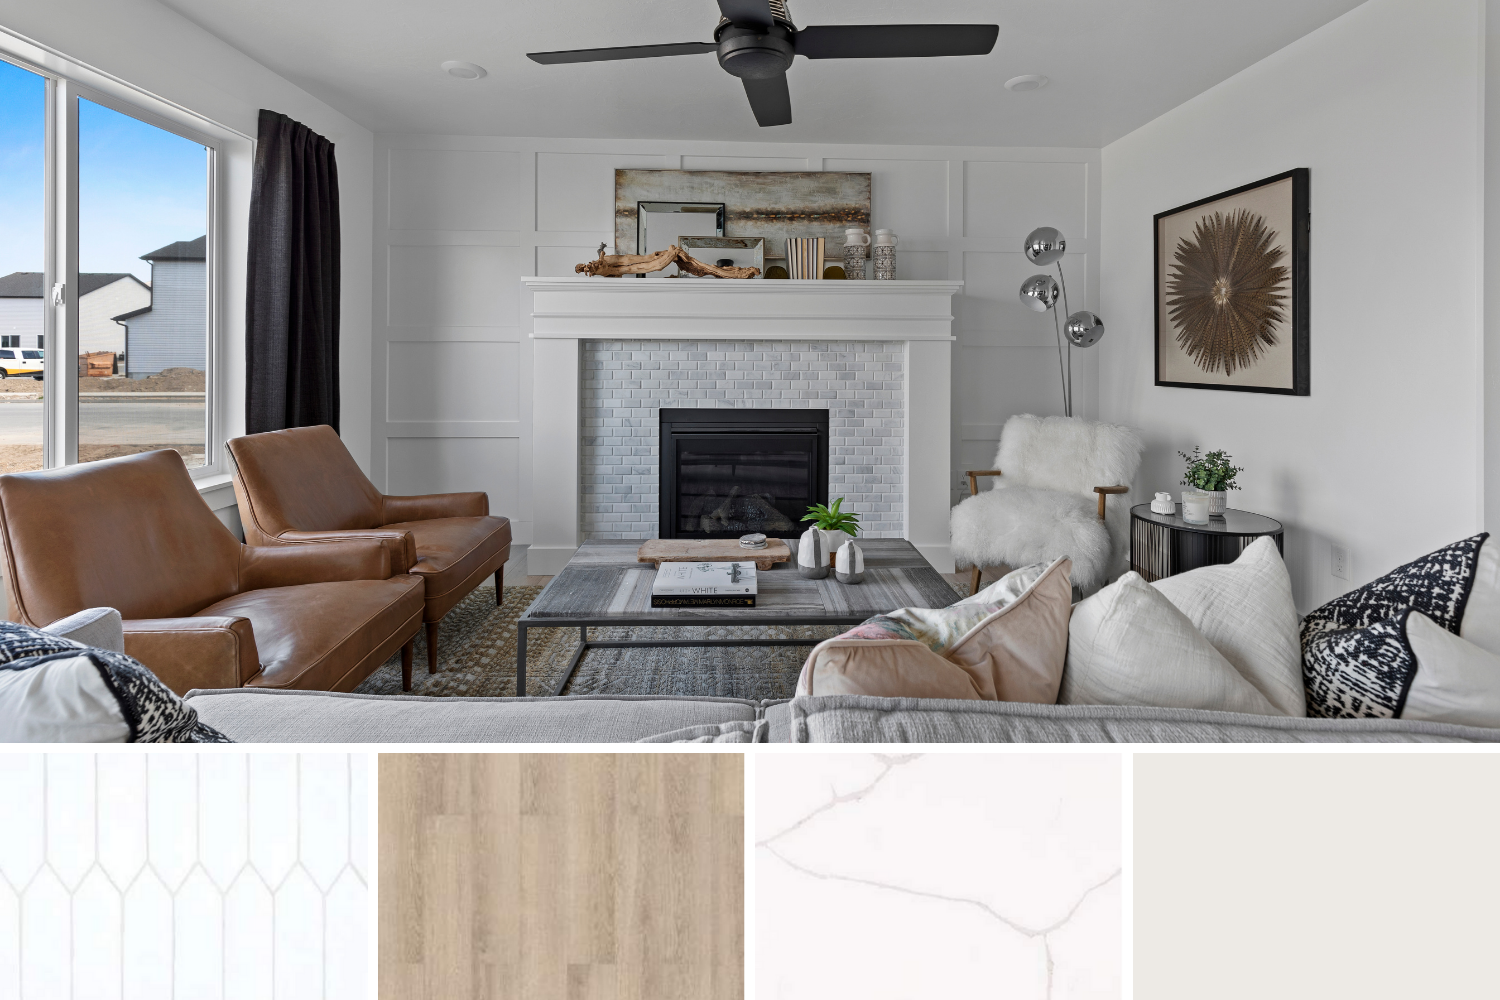 Get The Look Series: How to Design Your Home Similar to Our Greystone Model